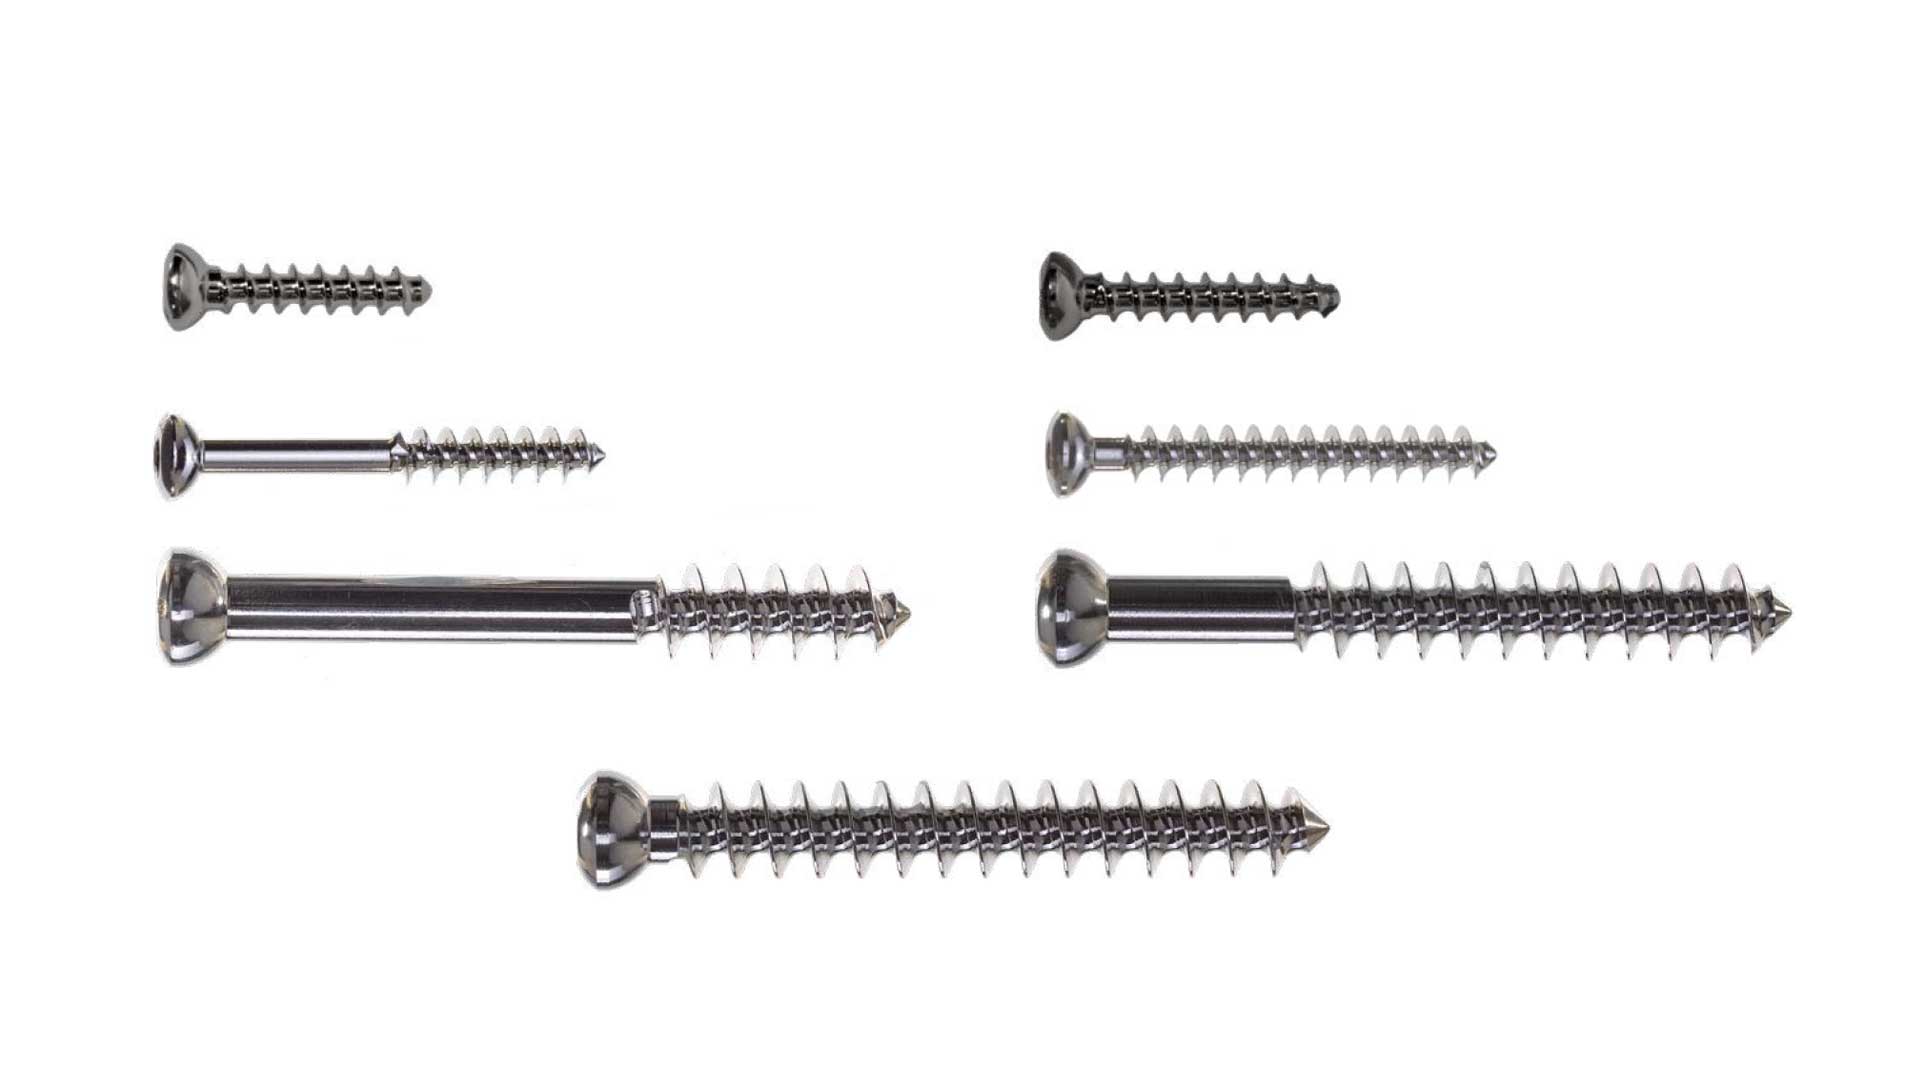 Königsee Implantate Products: Cancellous screws Standard; stainless steel, category Screws